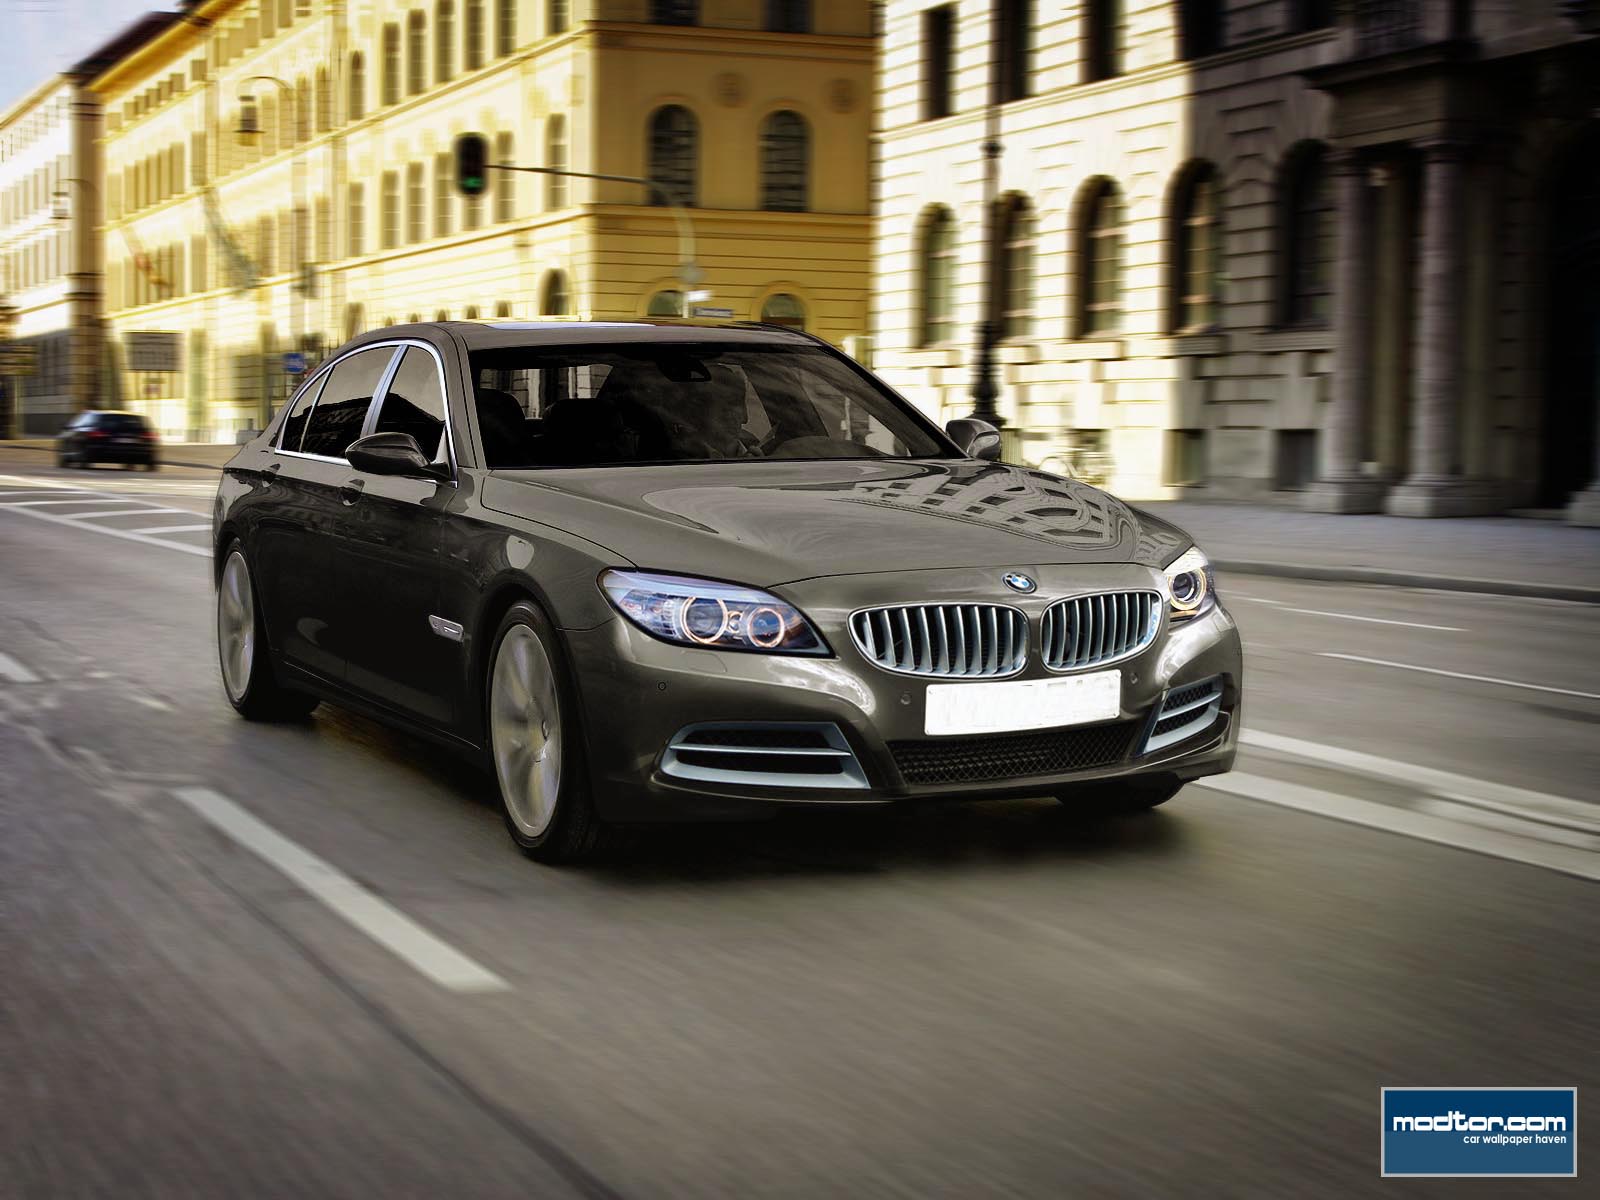 bmw-m7 rendering. The 7 Series GT would have been BMW's flagship,